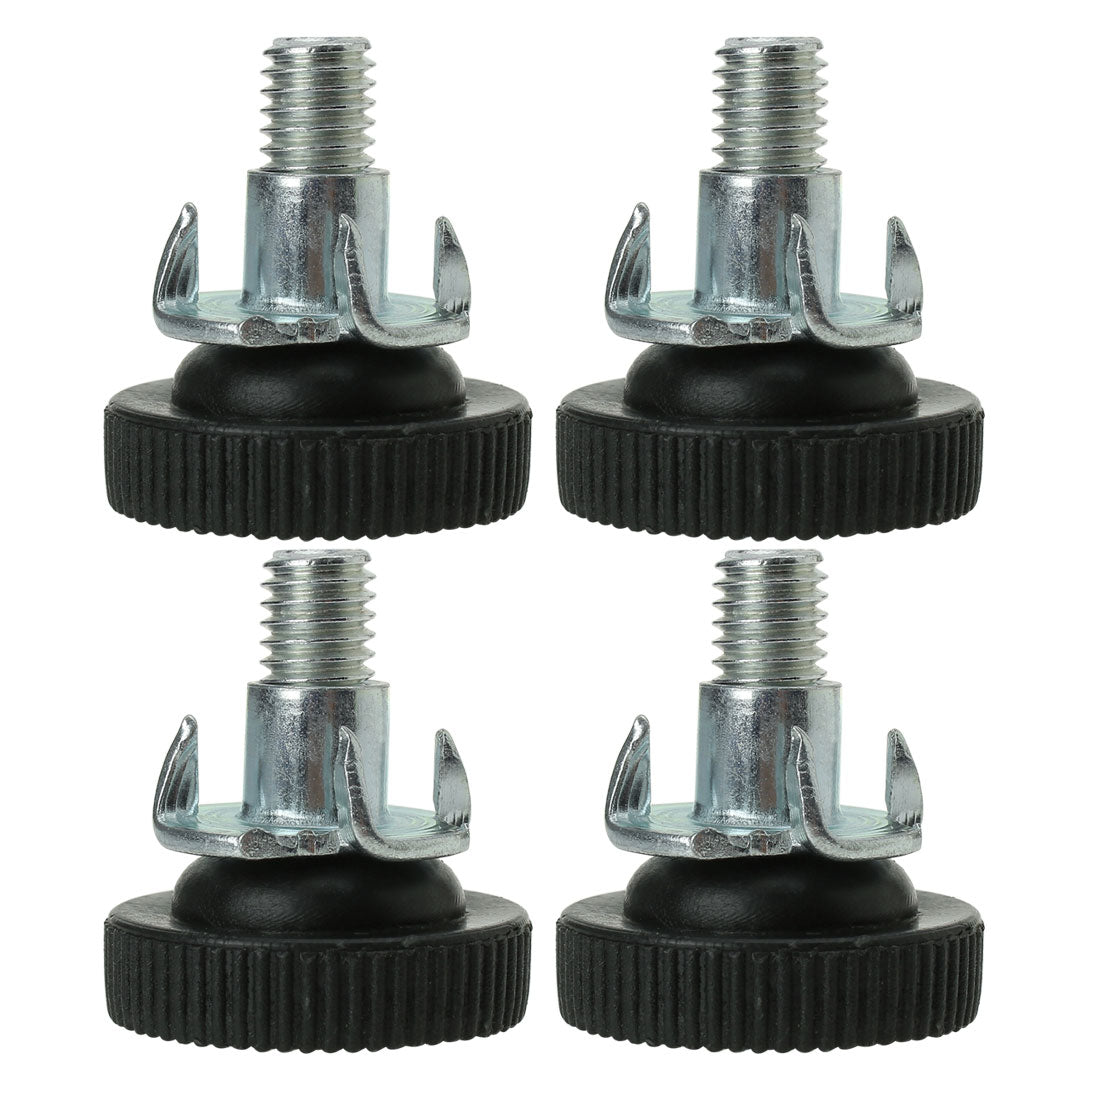 uxcell Uxcell M8 x 20 x 28mm Furniture Leveling Feet Adjustable Leveler with T-nuts Black 4pcs